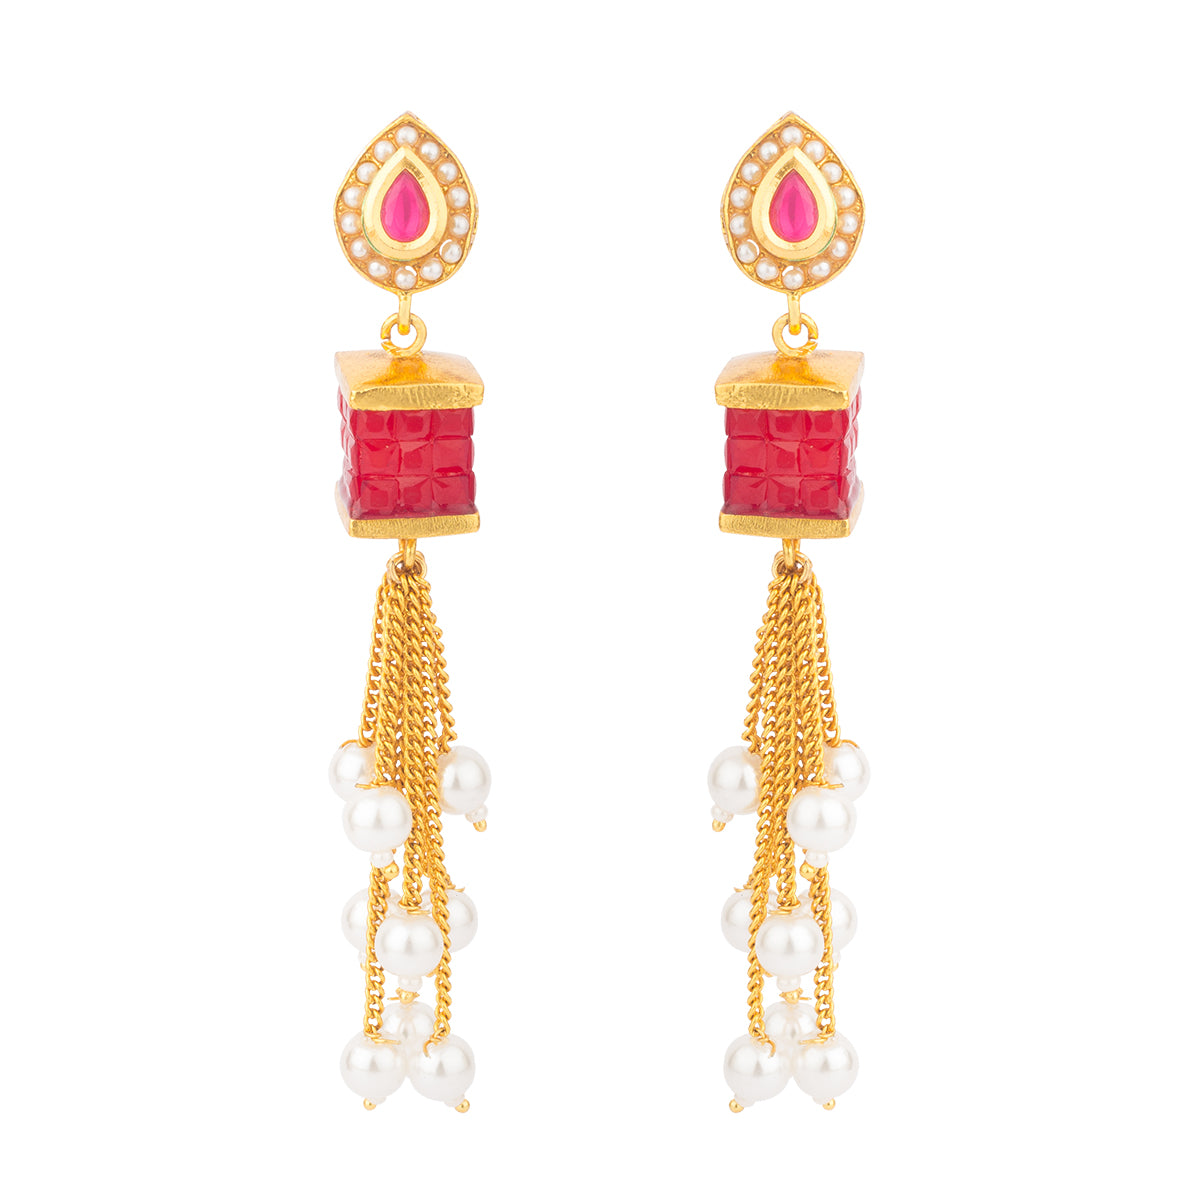 With a lovely color, this earring is carved in a box shaped stone and strings hanging with pearls making it uniquely gorgeous.